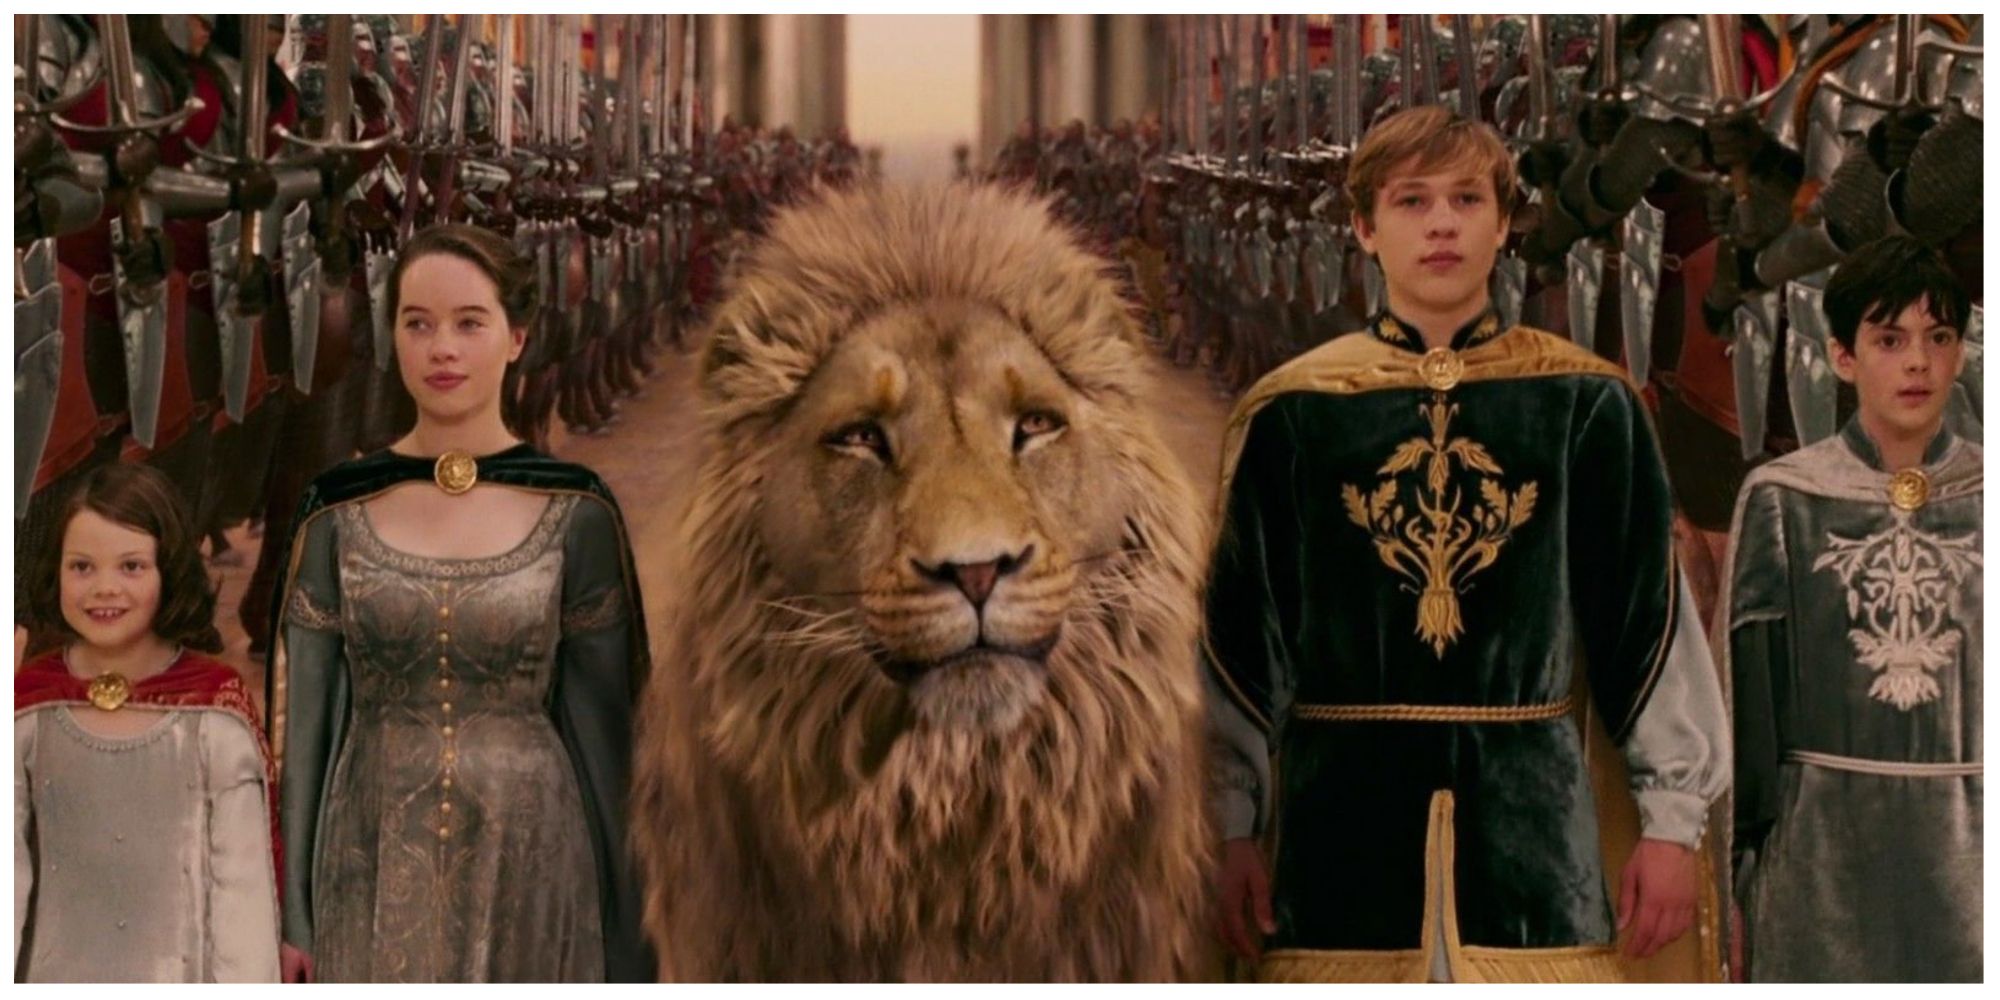 Aslan with the Pevensie children: Lucy, Susan, Edmund, and Peter